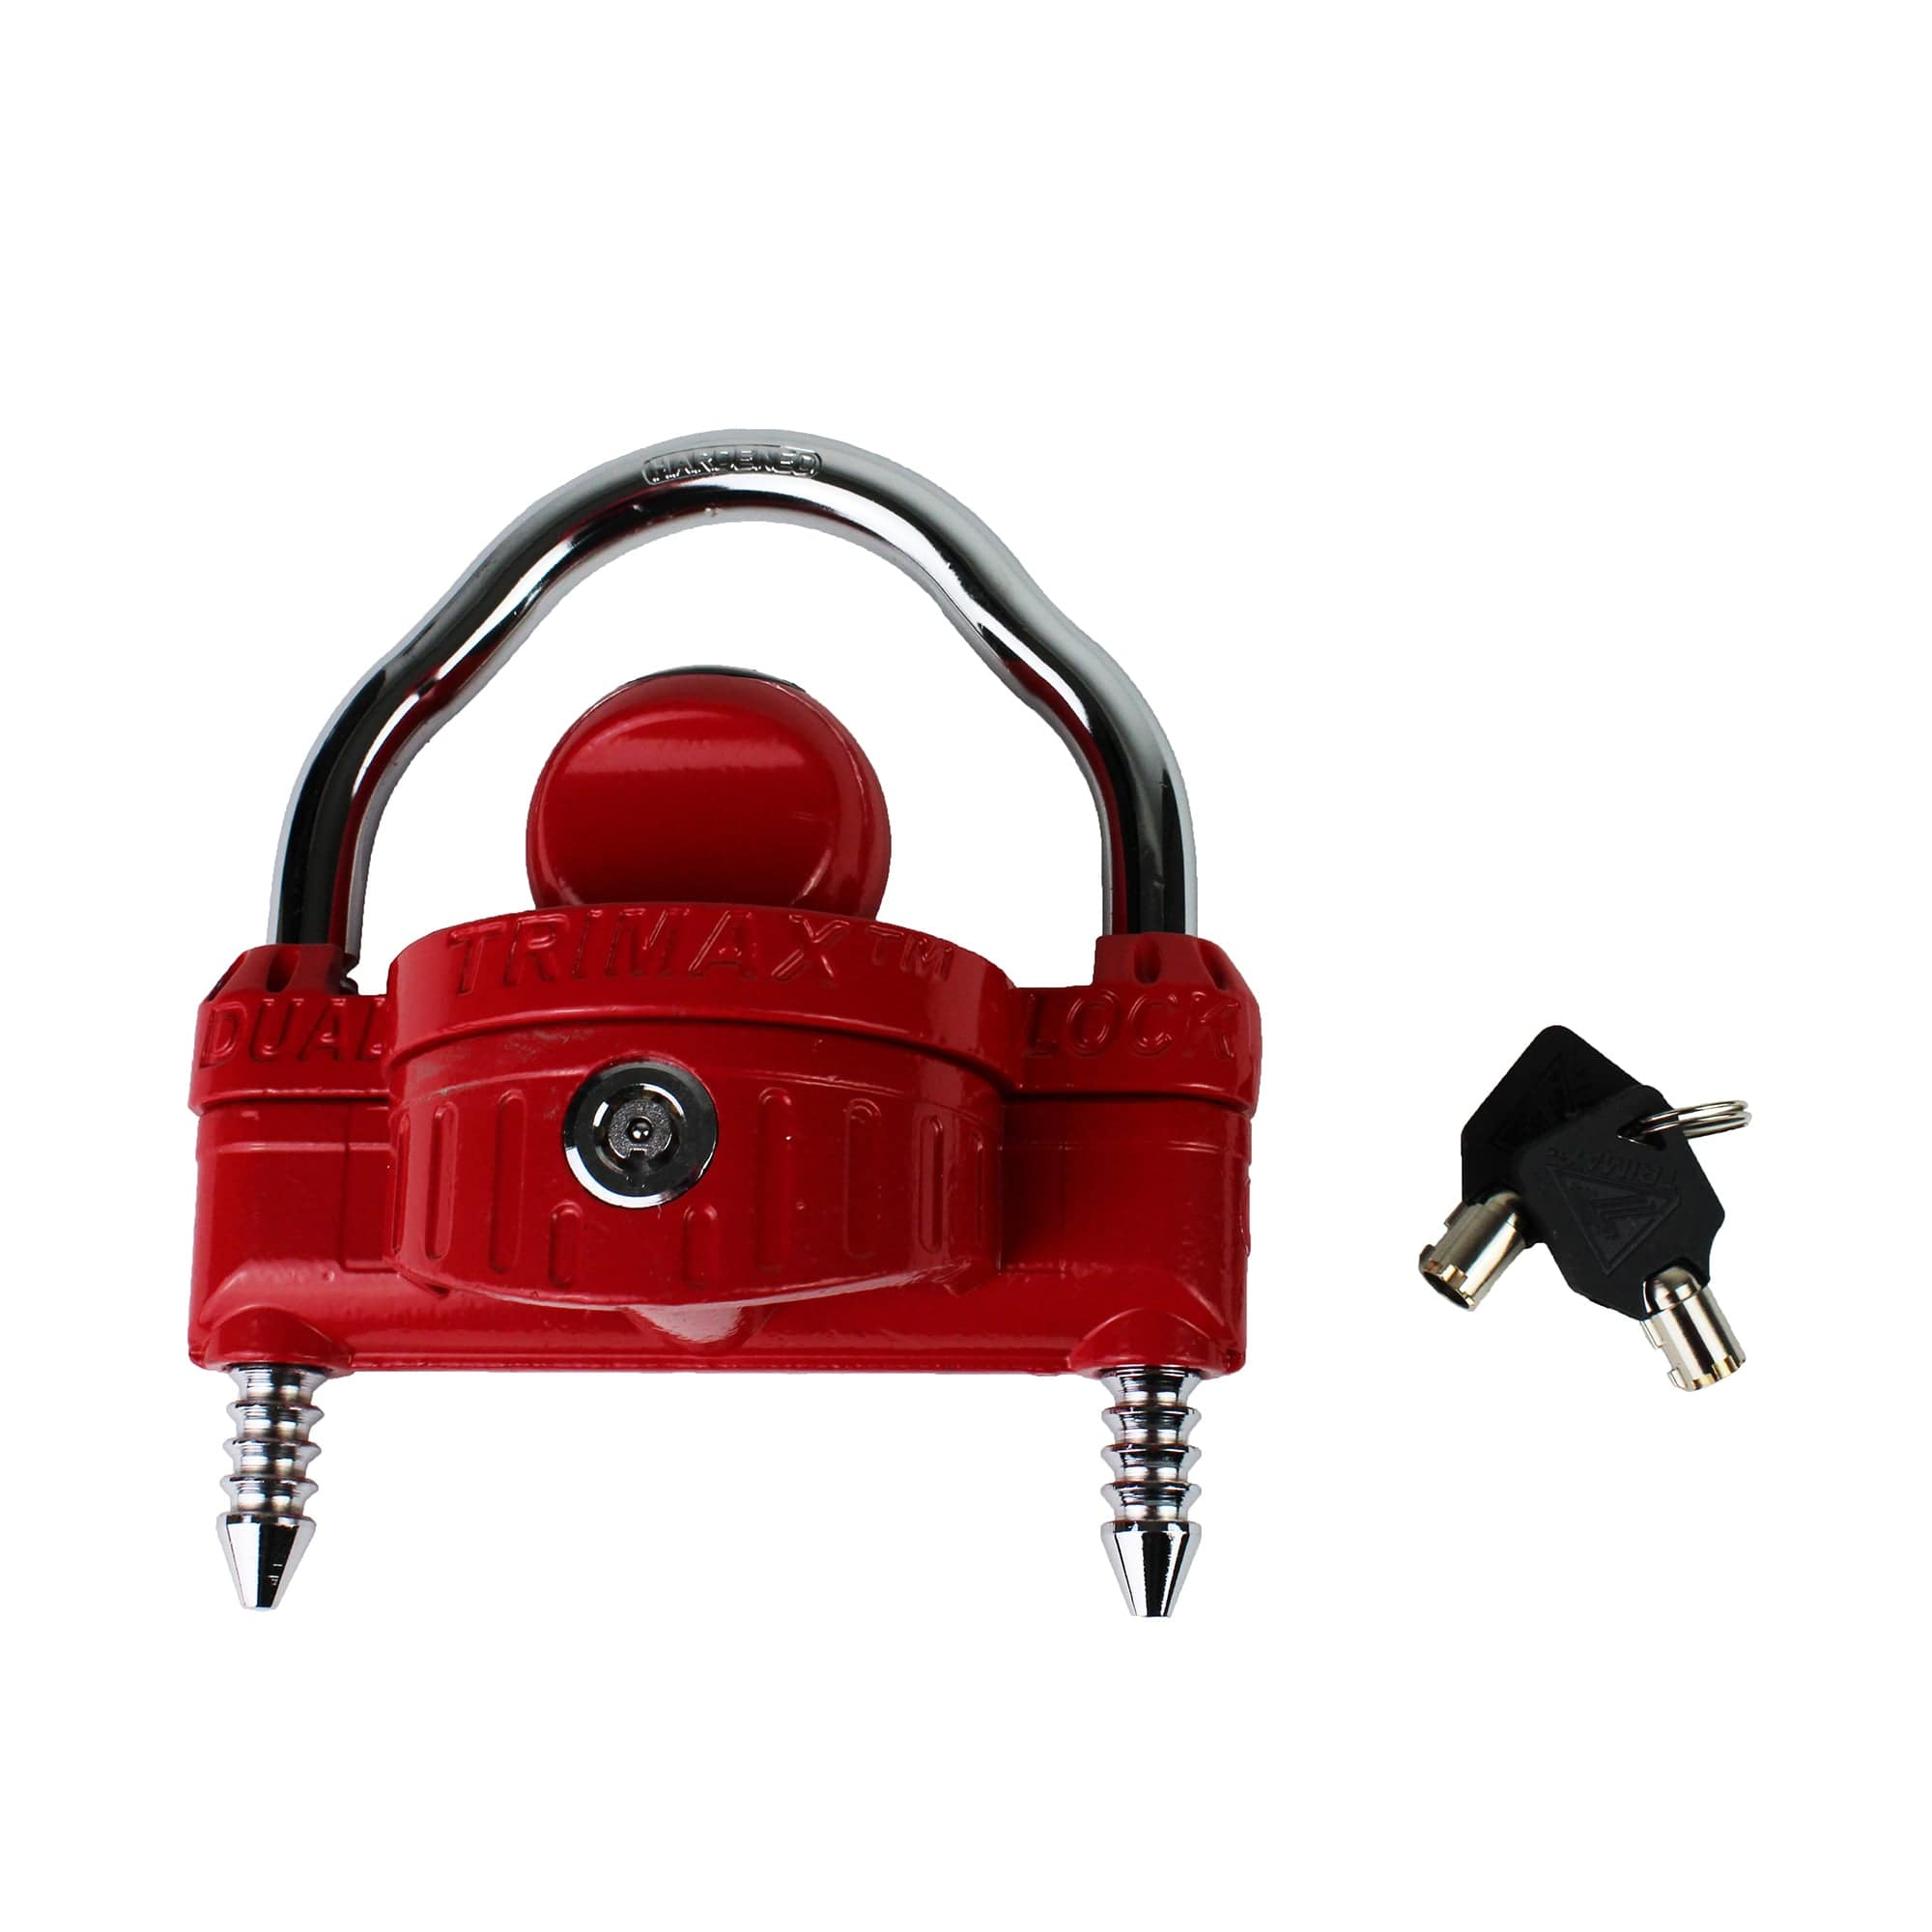 Trimax UMAX25 Universal Narrow Body 1/2” Steel Shackle Dual Coupler Lock with Integrated U-Lock Feature